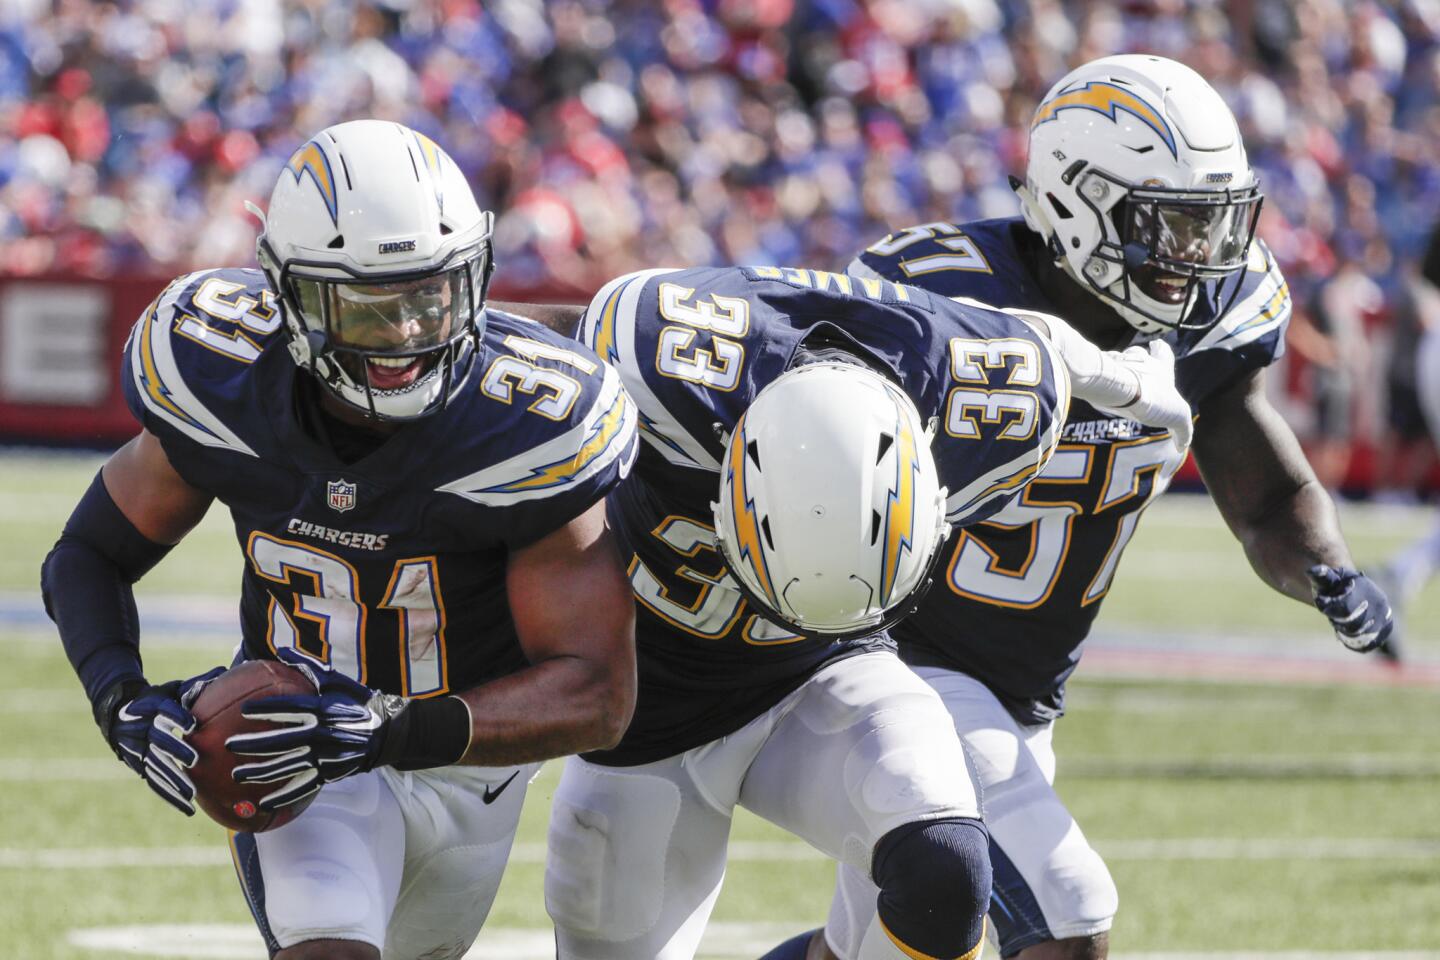 Chargers safety Adrian Phillips celebrates an interception with teammates Derwin James and Jatavis Brown at New Era Field on Sunday.